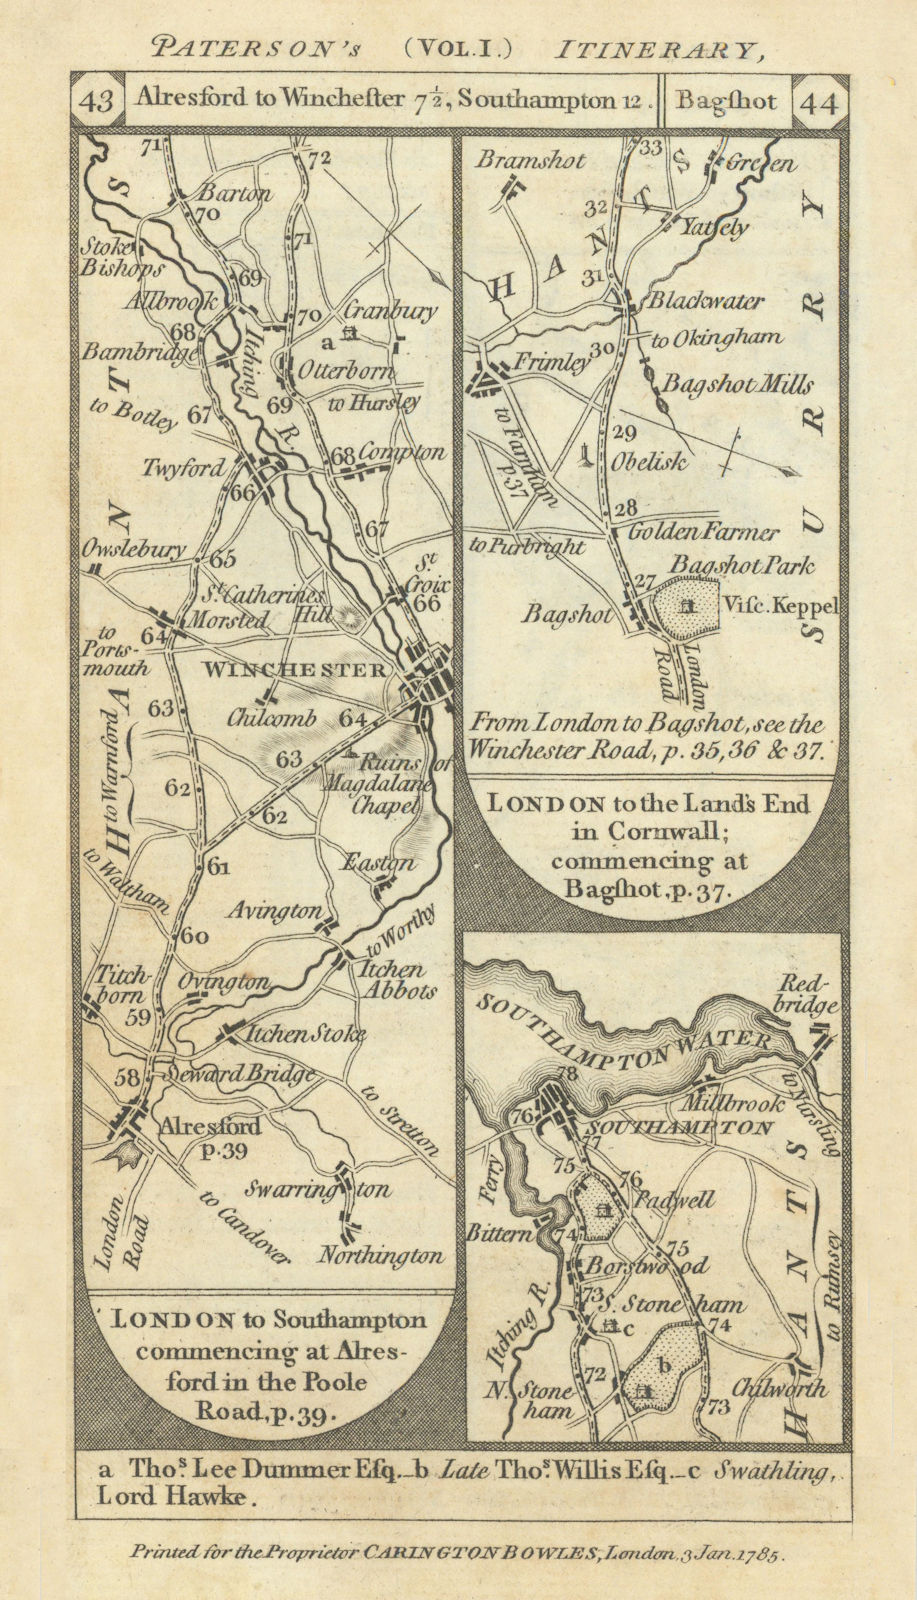 Associate Product Winchester-Southampton. Bagshot-Yateley road strip map PATERSON 1785 old